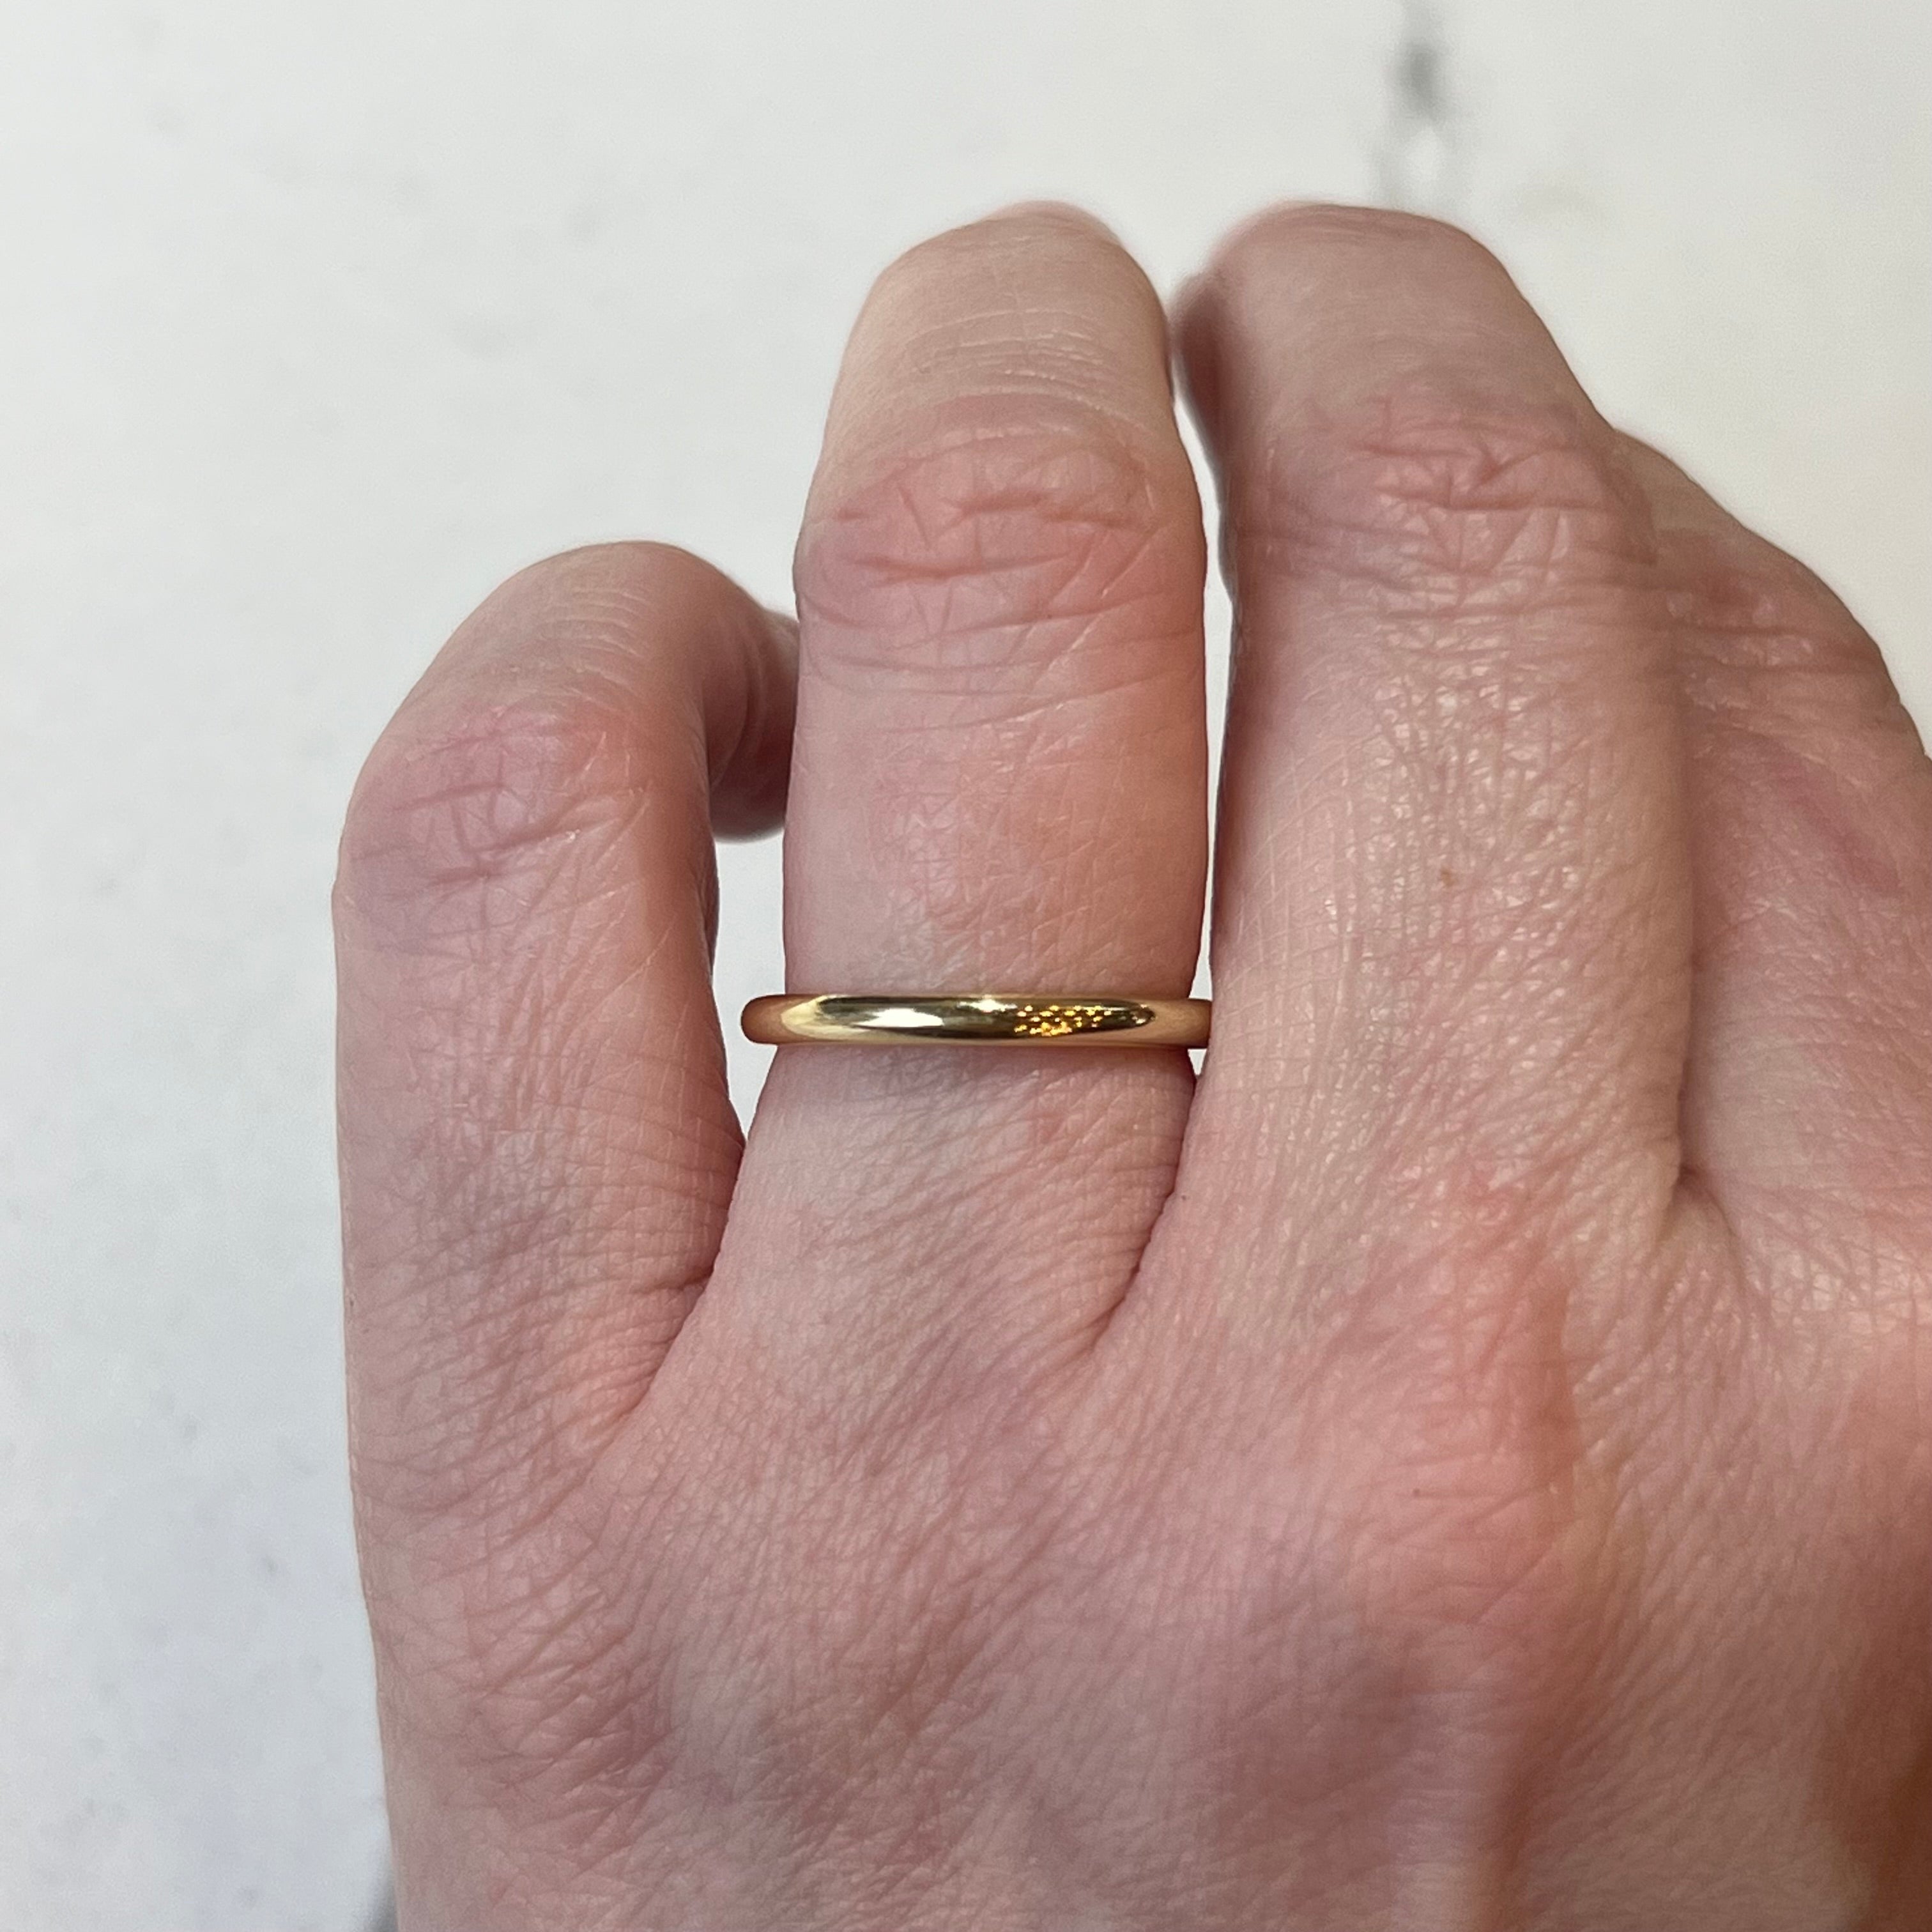 Ridiculously Simple 14K Gold Filled Stacking Band Ring - Thin Hammered  Stack Ring, Simple Dainty Ring Band, Minimalist Gold Ring | MakerPlace by  Michaels